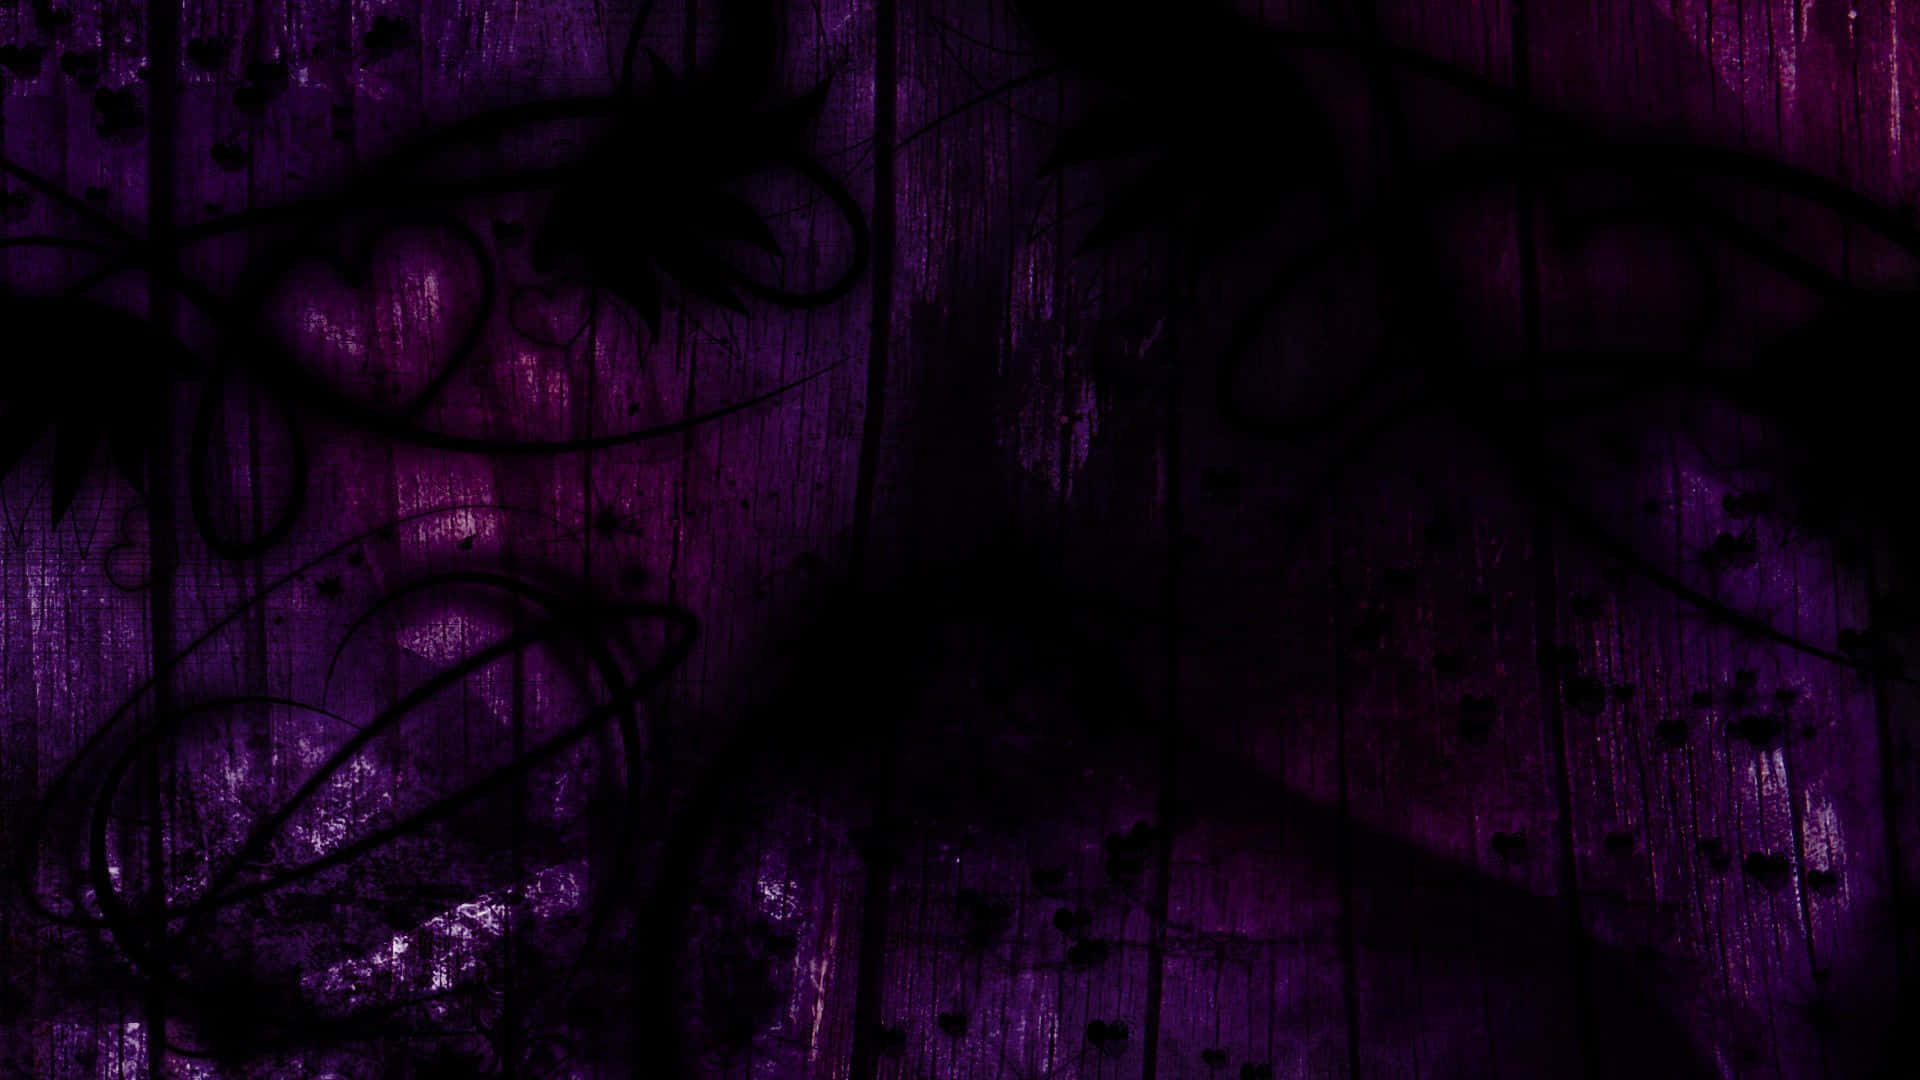 An Abstract Vision Of A Purple Grunge Aesthetic Wallpaper